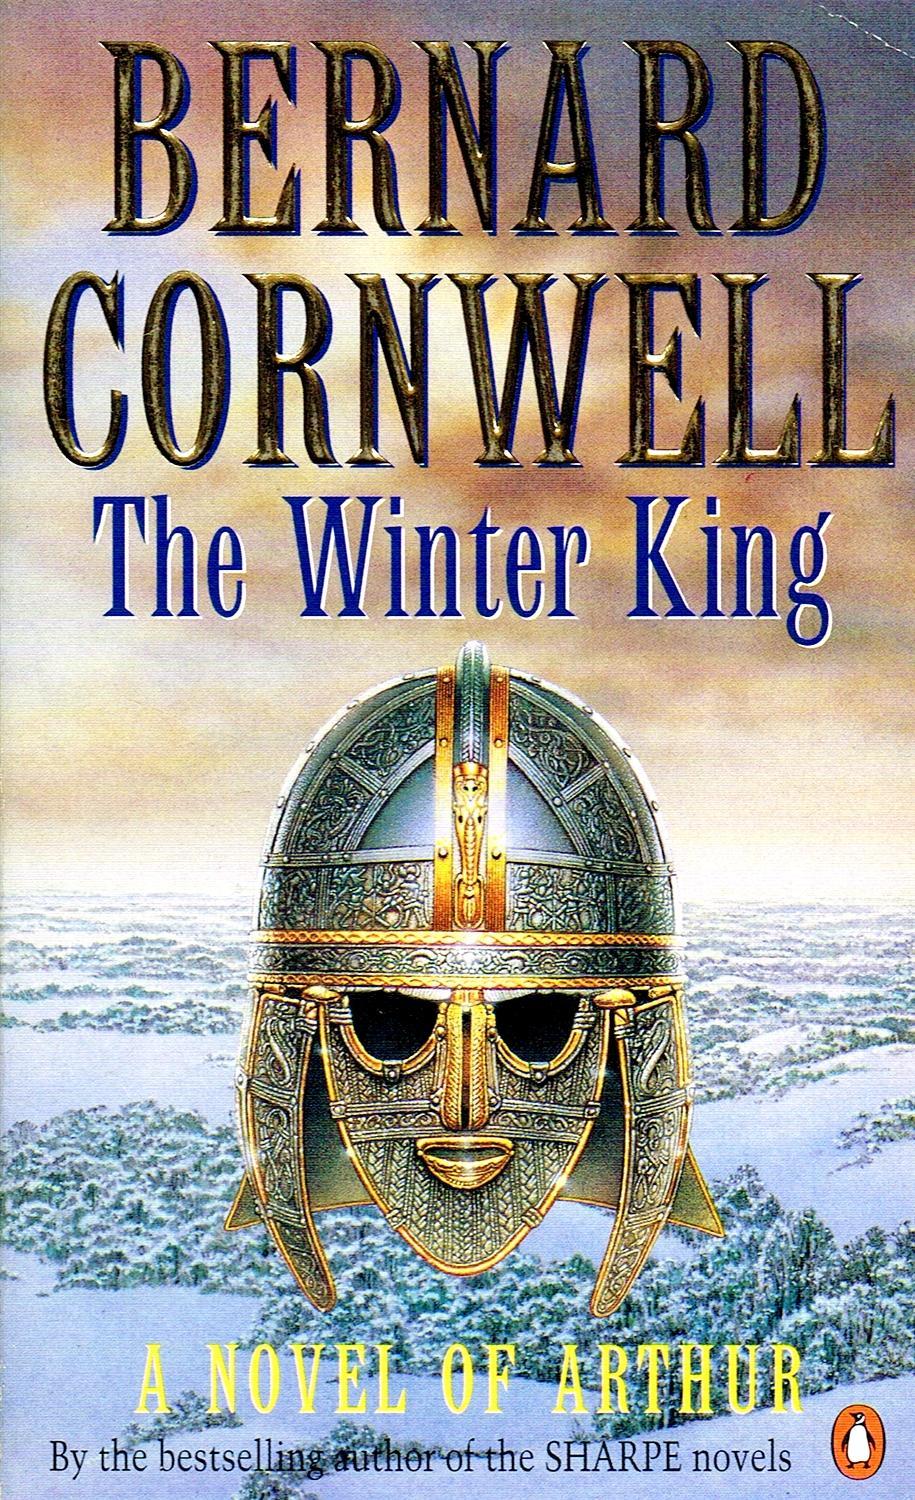 The Winter King cast revealed for itv's new Cornwell adaptation